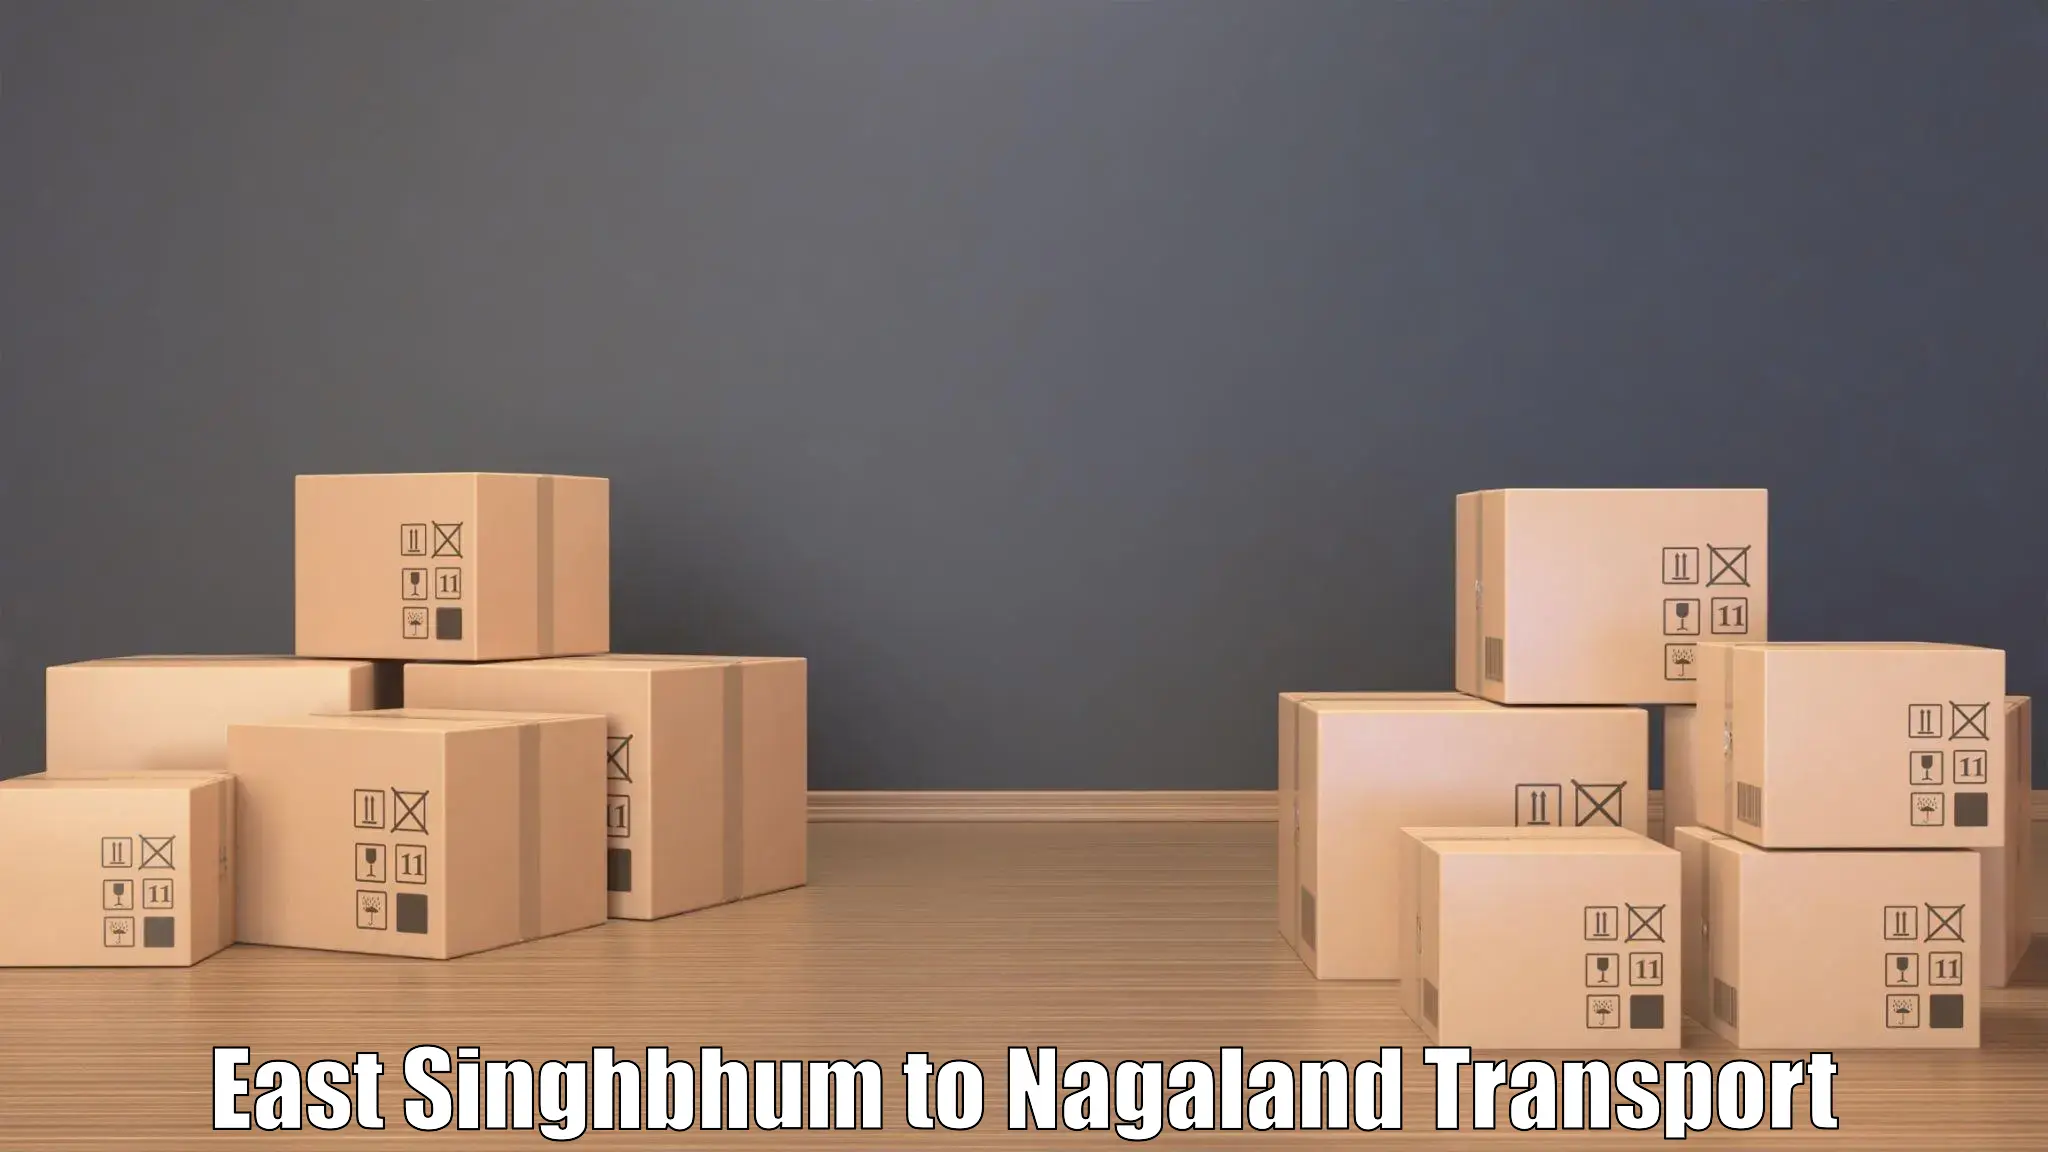 Truck transport companies in India East Singhbhum to Nagaland